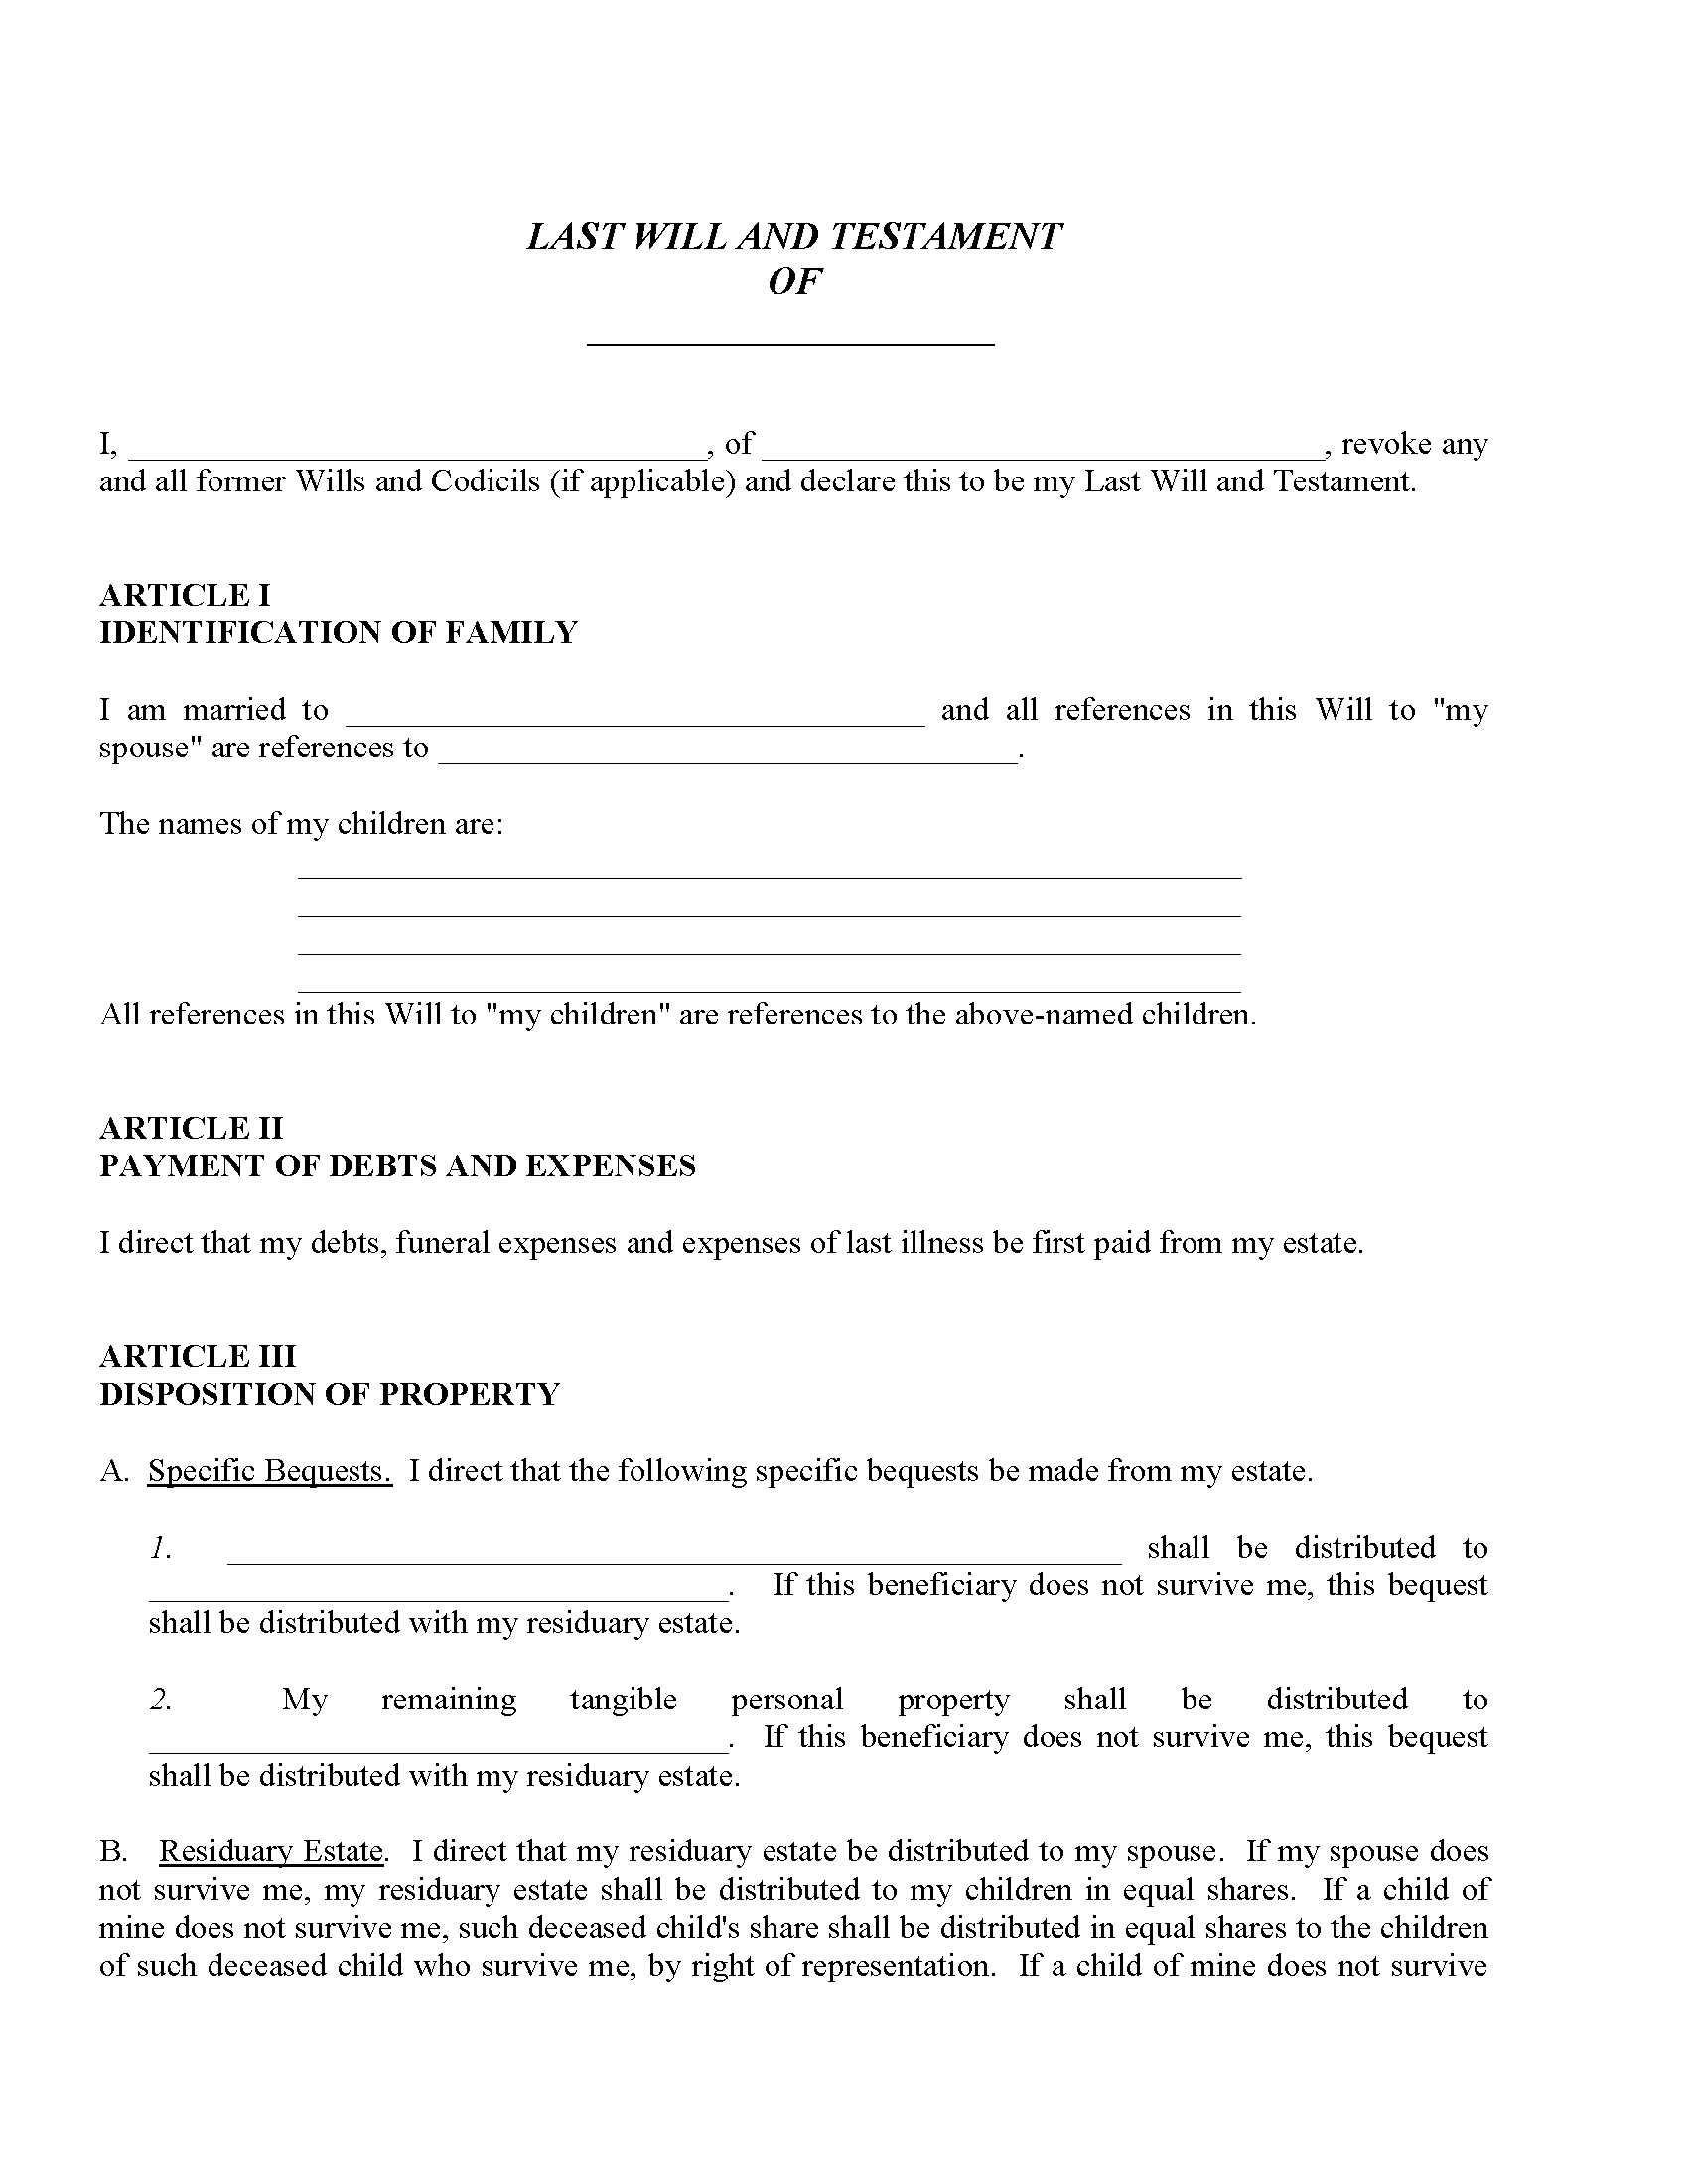 Tennessee Wills and Codicils Free Printable Legal Forms